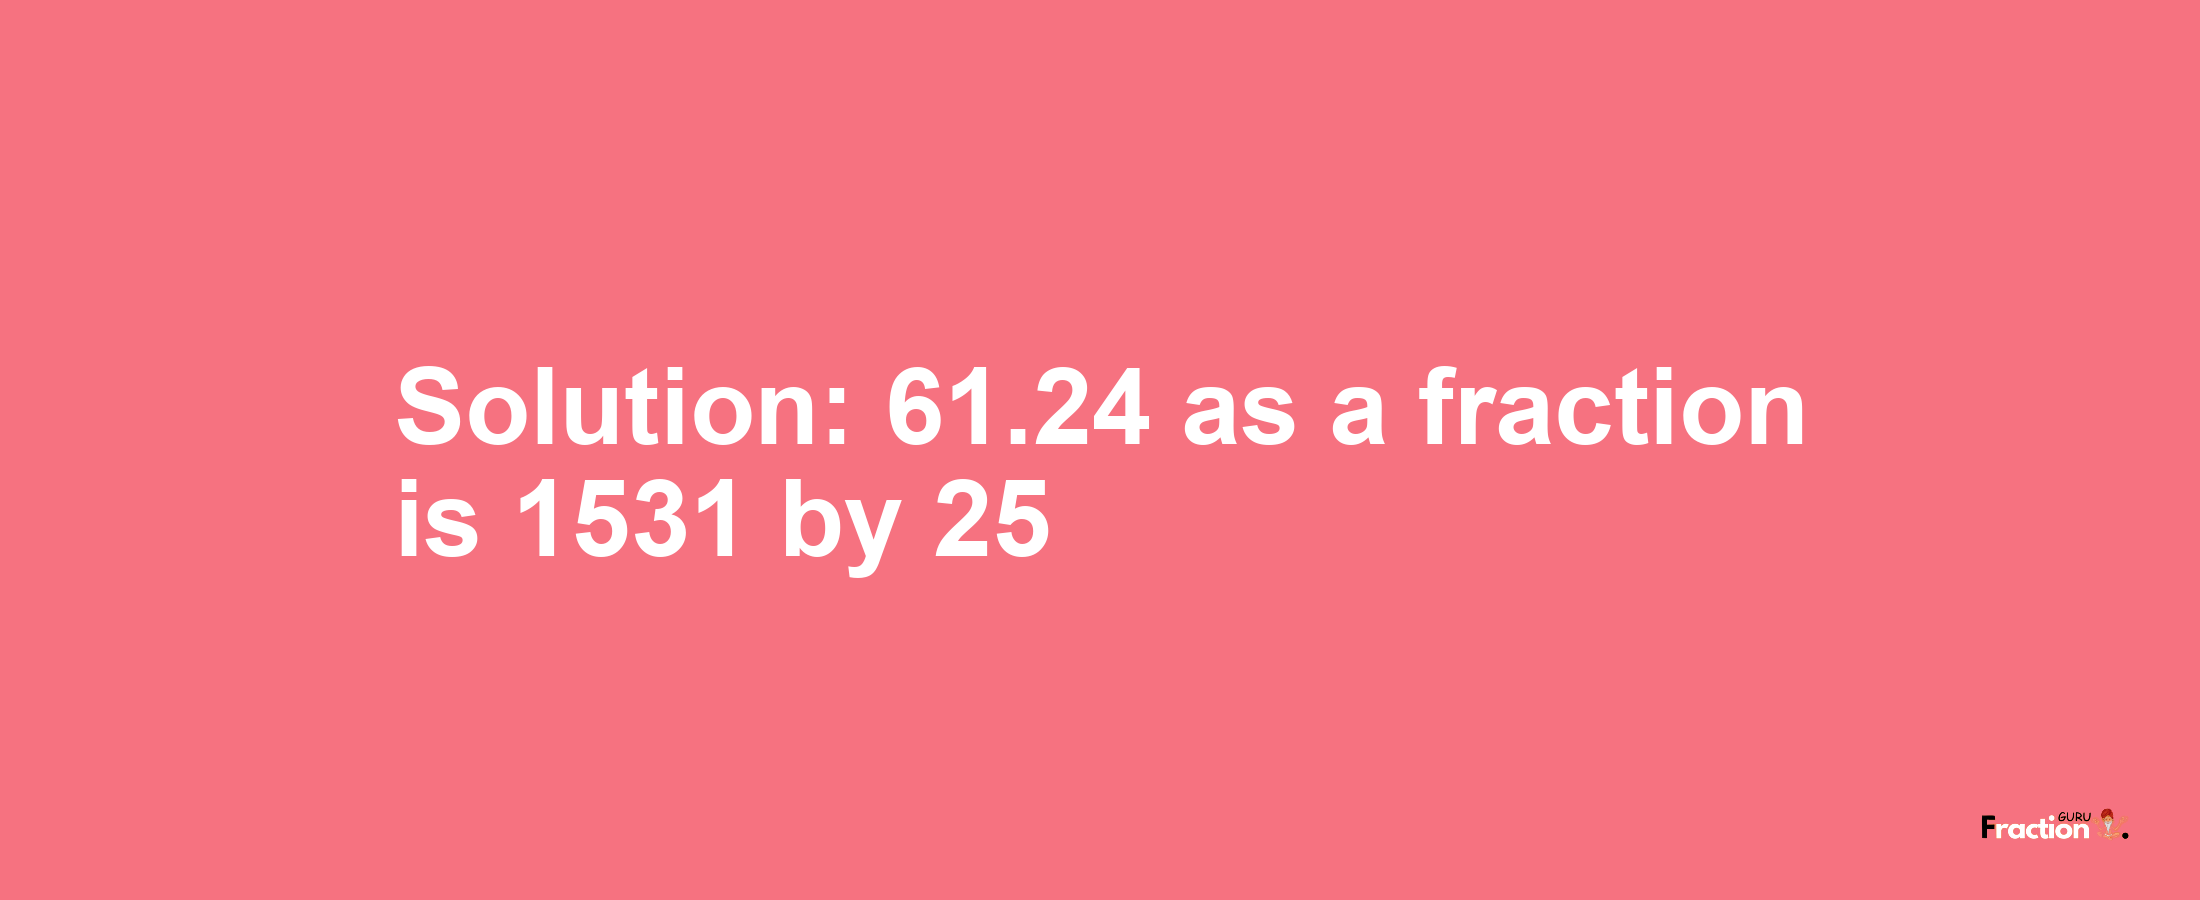 Solution:61.24 as a fraction is 1531/25